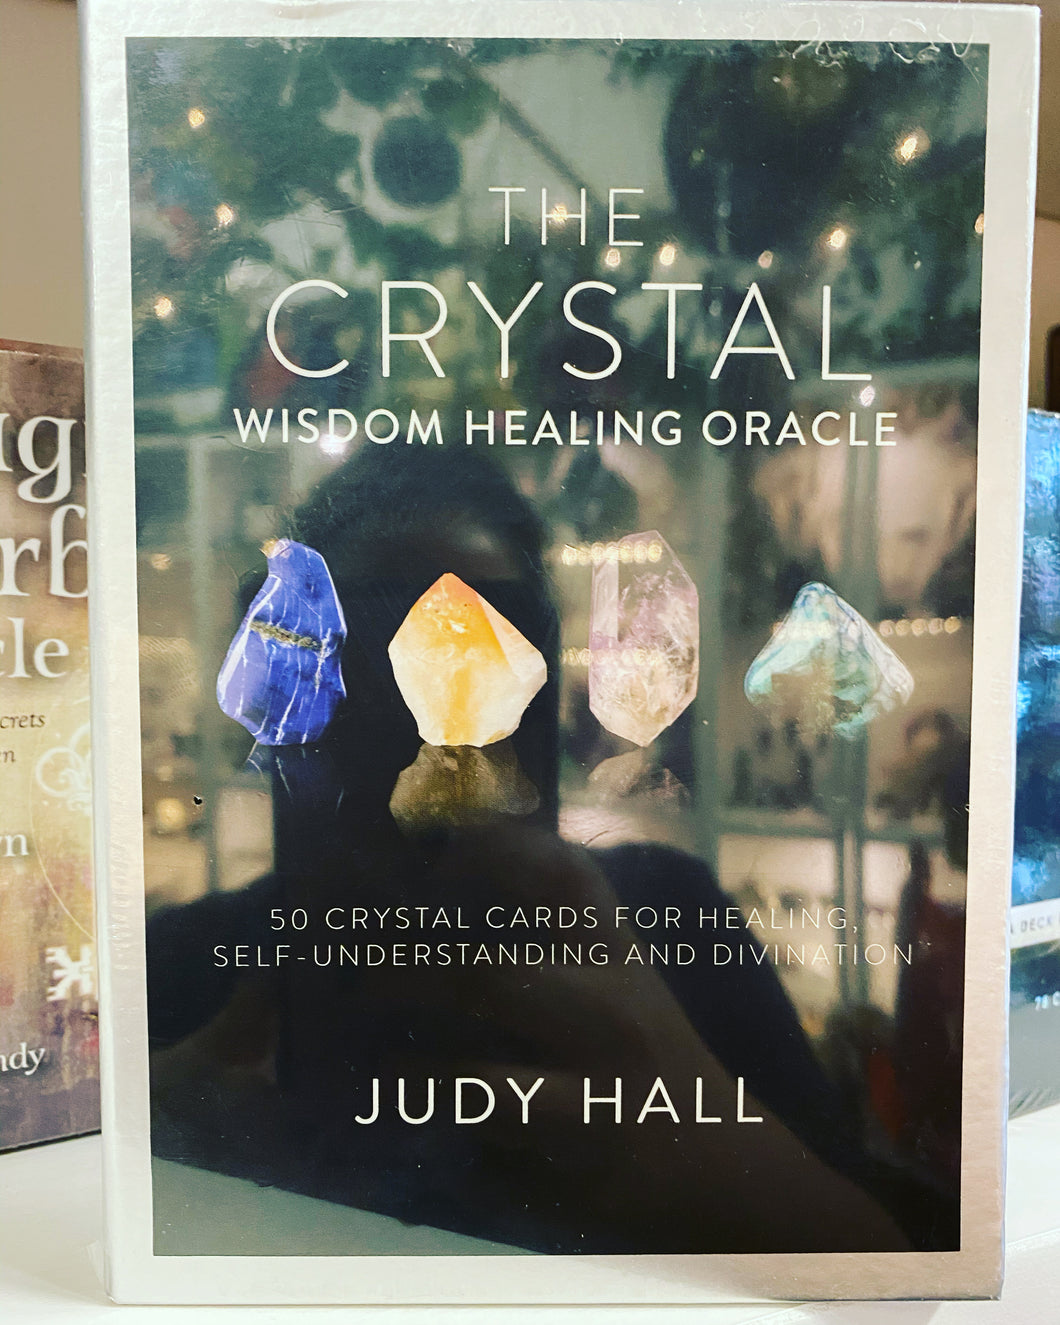 The Crystal Wisdom healing Oracle